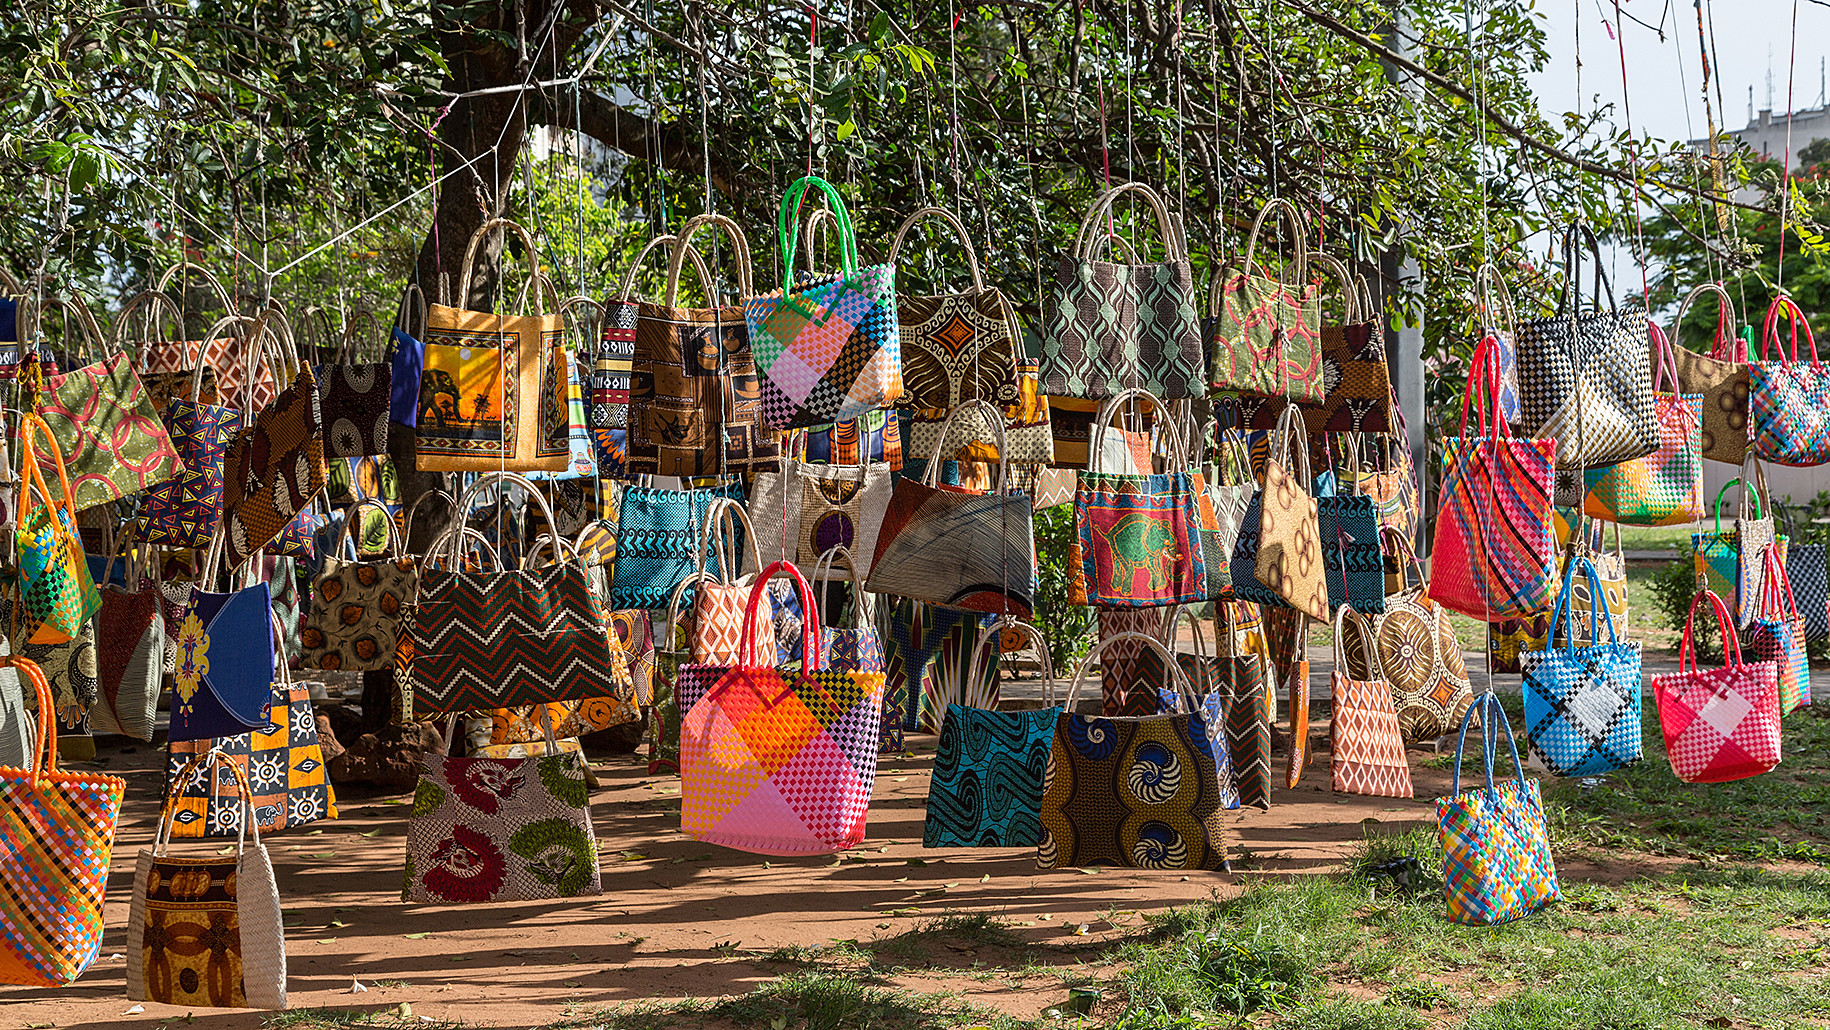 Famous Tonga woven baskets at the market.